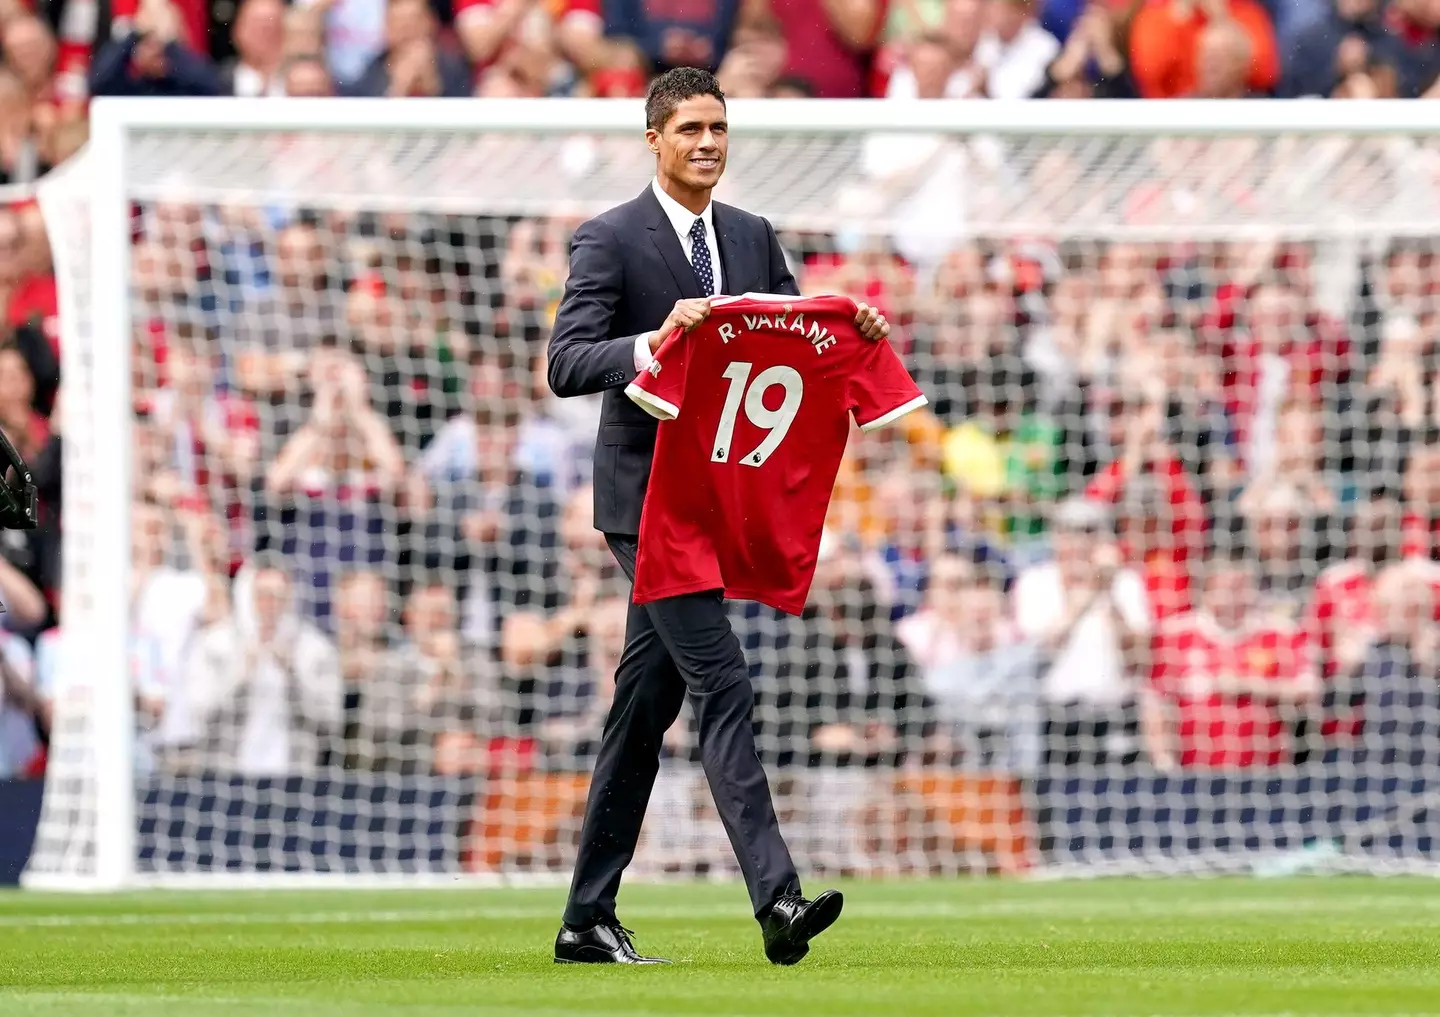 Raphael Varane was given an Old Trafford presentation after signing from Real Madrid last year. Image credit: Alamy